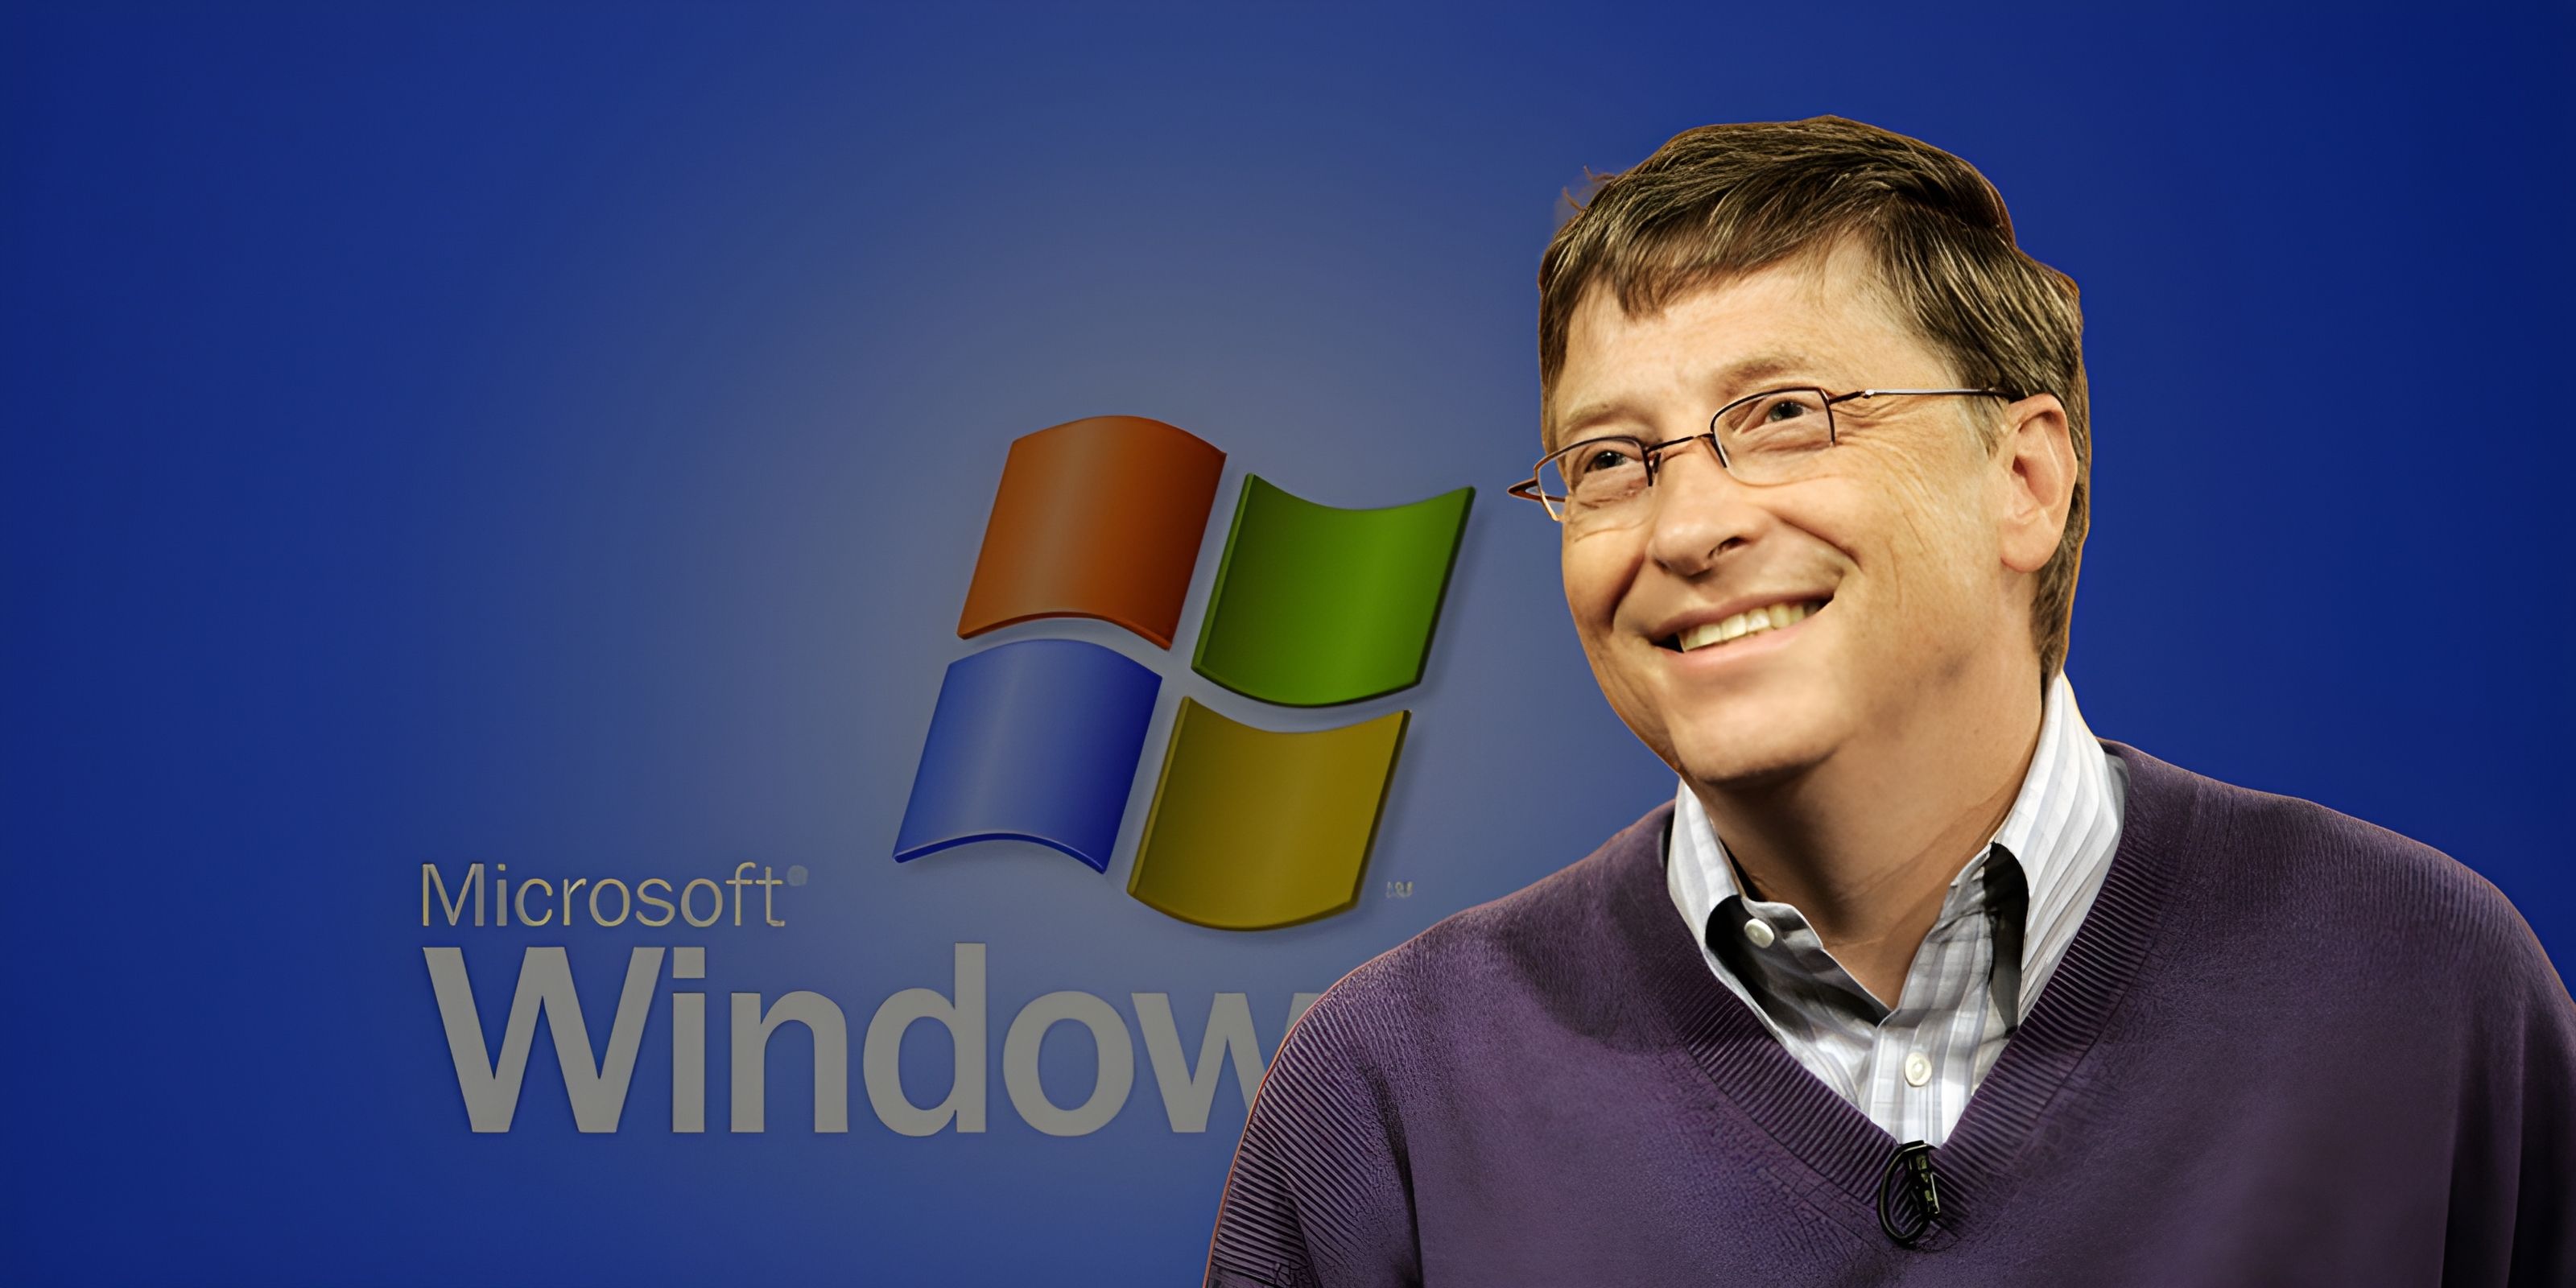 Bill Gates Celebrates Windows Anniversary: 'Some memories stick with you forever'